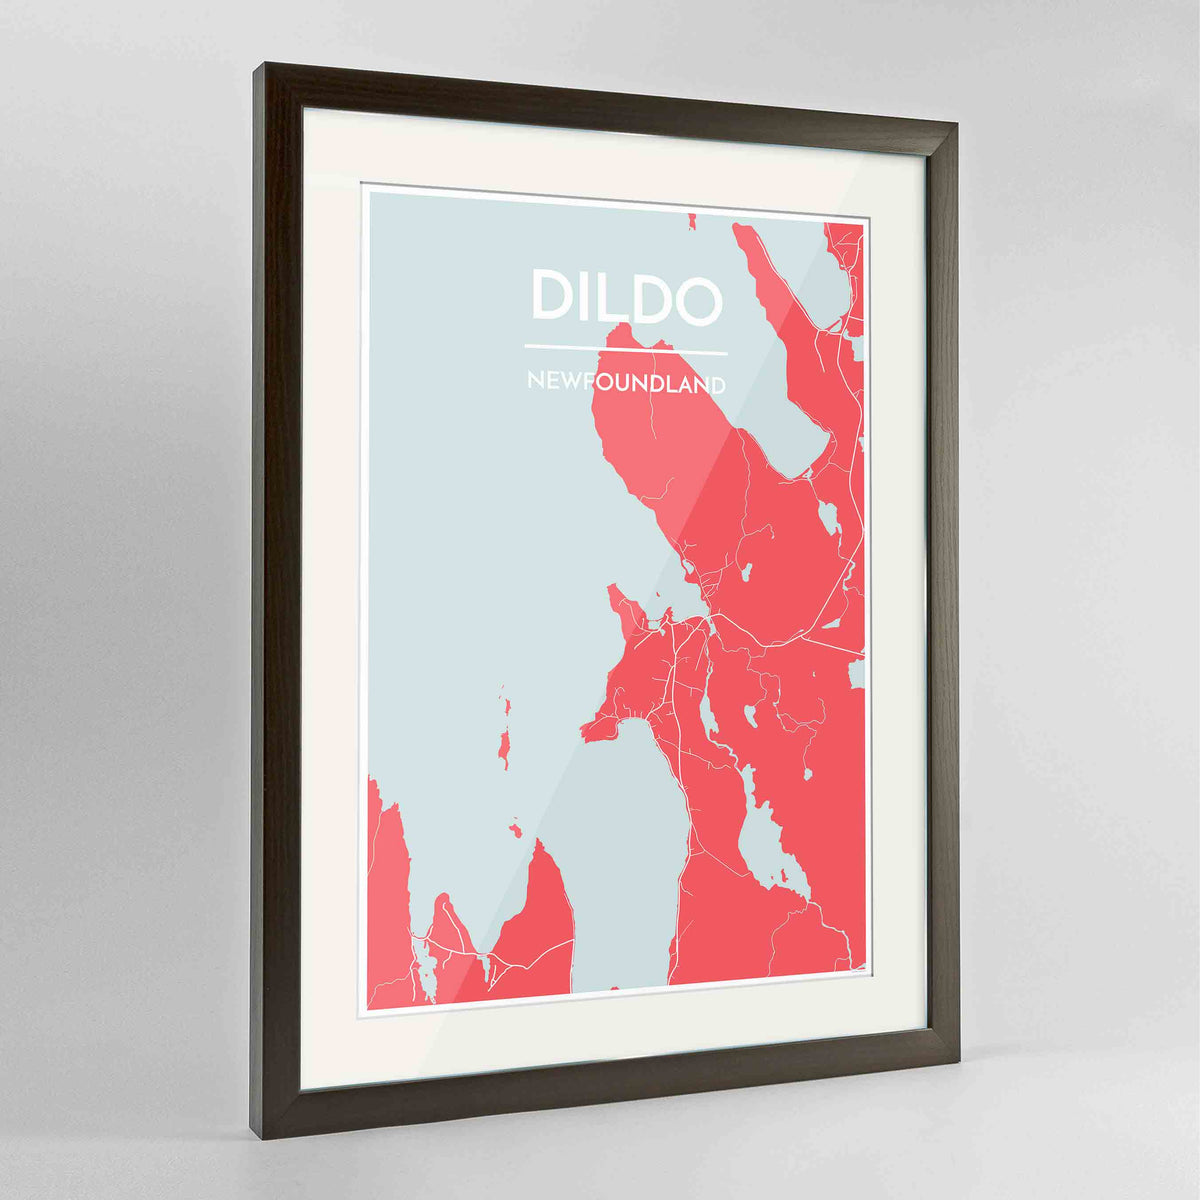 Framed Dildo Cove Map Art Print 24x36&quot; Contemporary Walnut frame Point Two Design Group